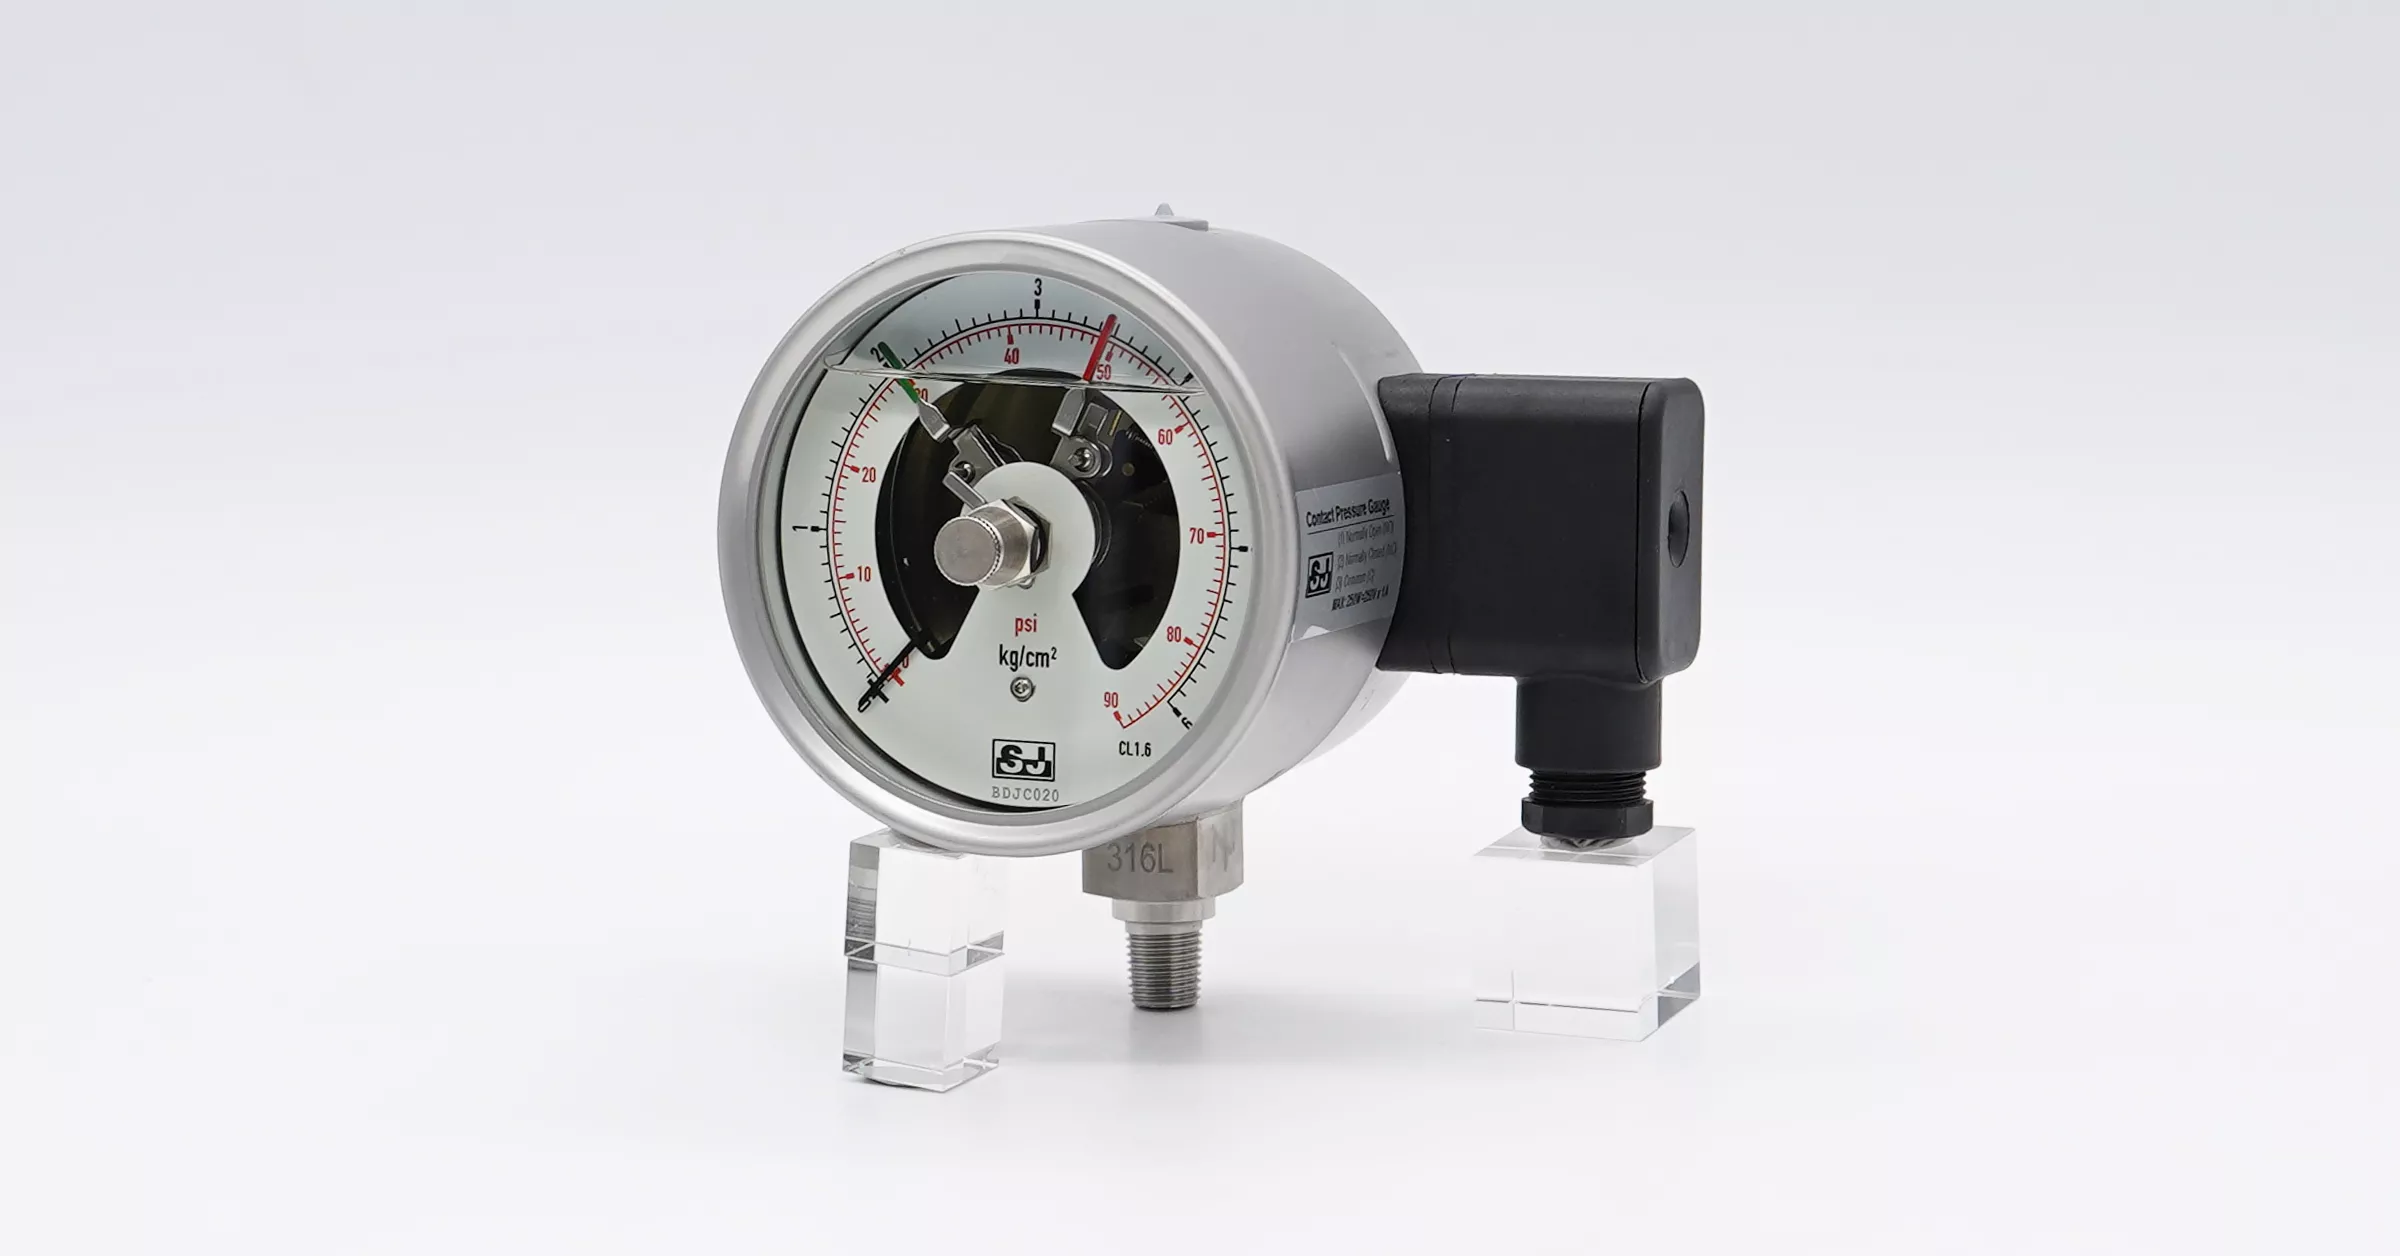 Switch Contact Pressure Gauge, Euro Warning/Alarm Contact_PRE4.H